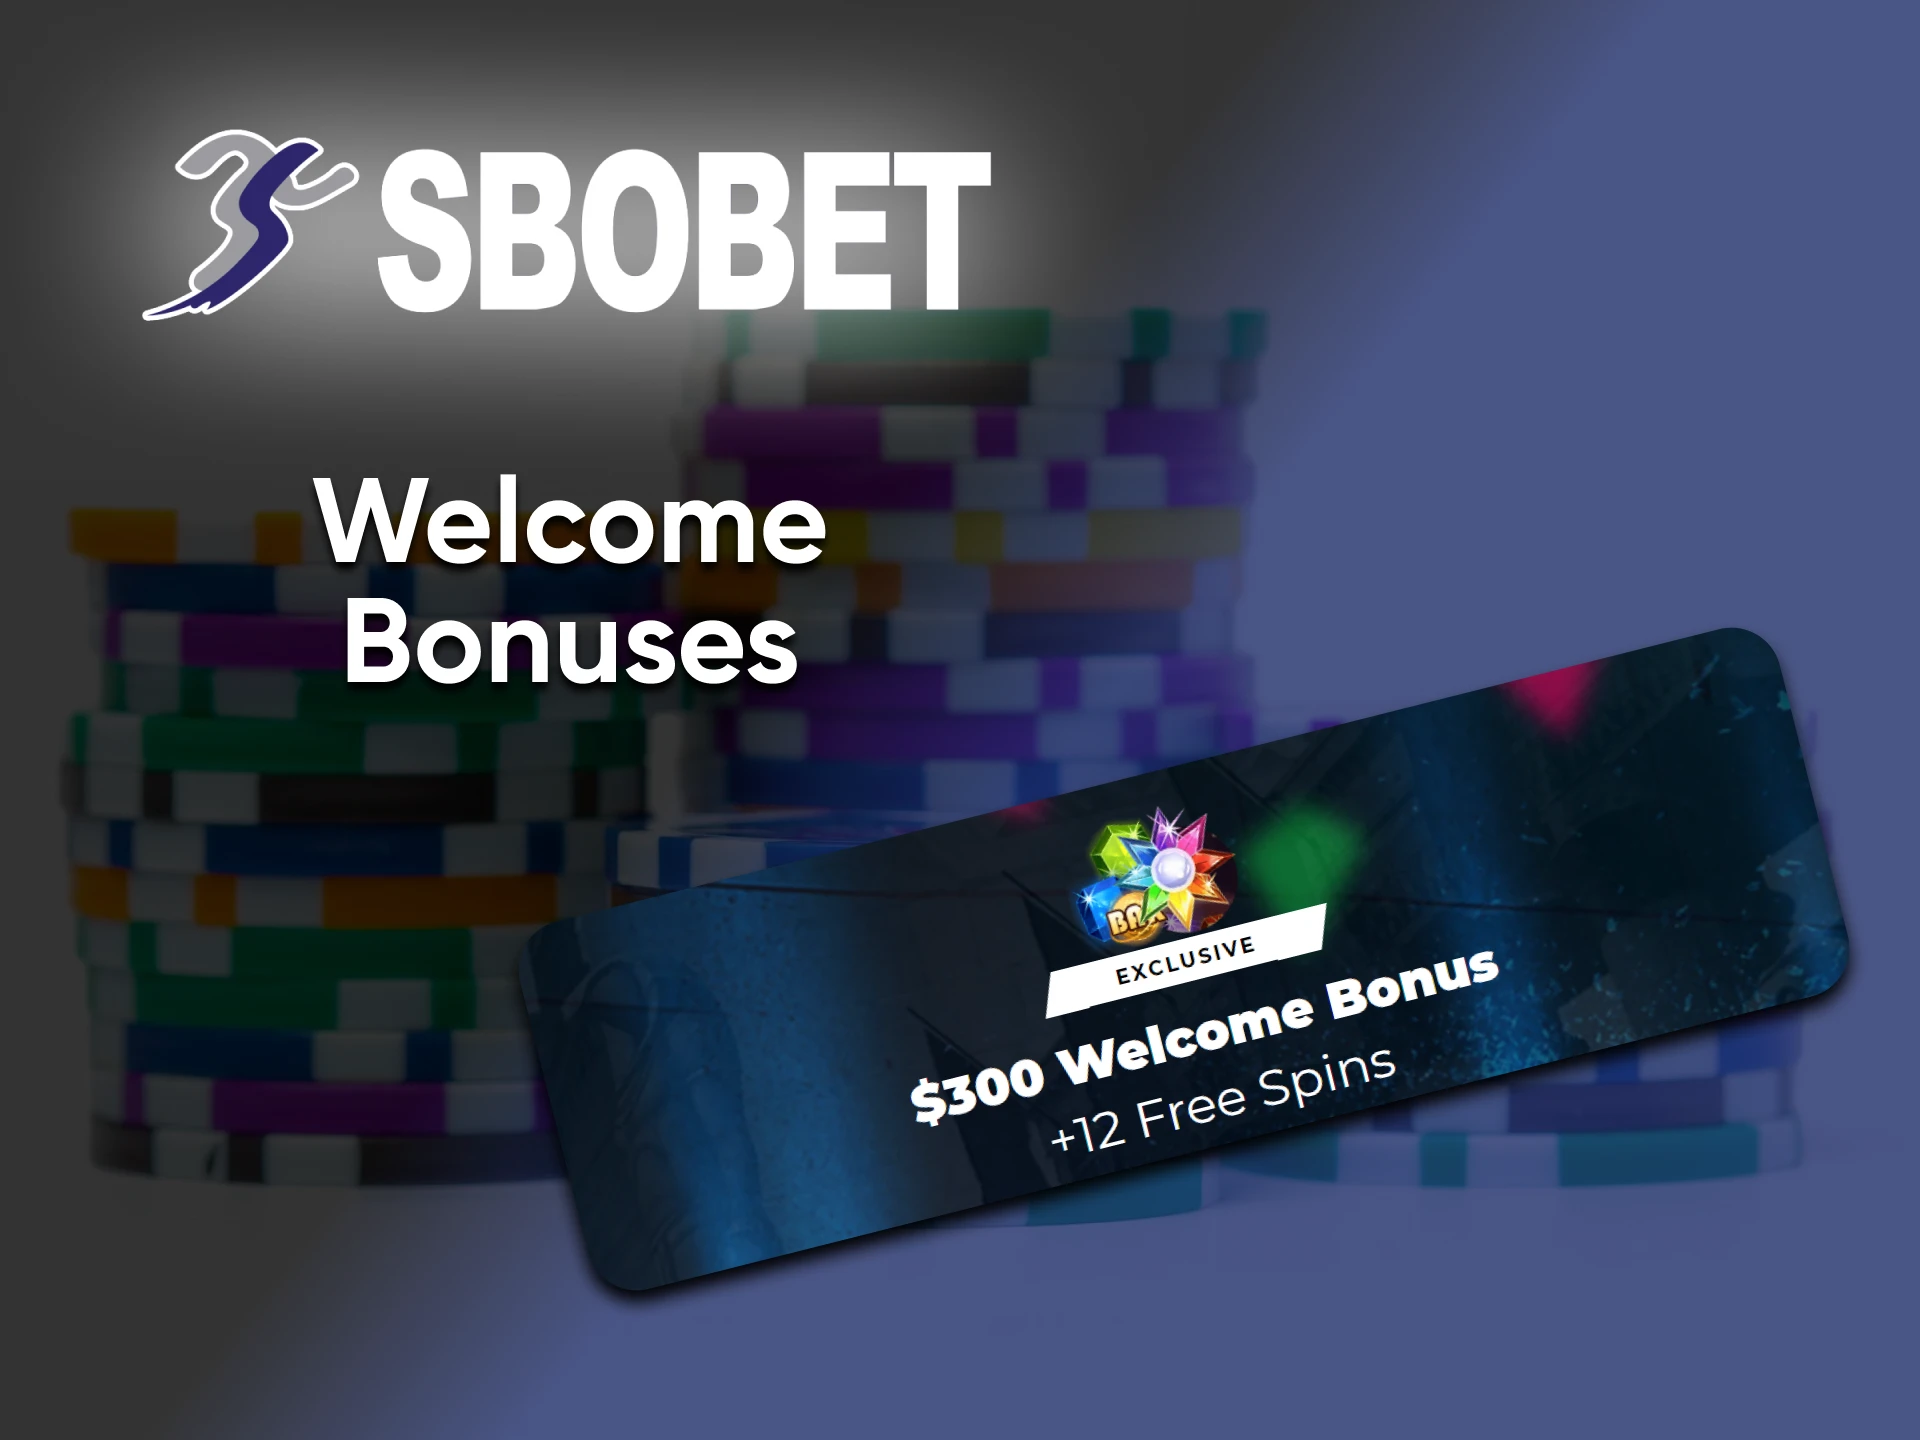 By playing at the casino from Sbobet you get bonuses.